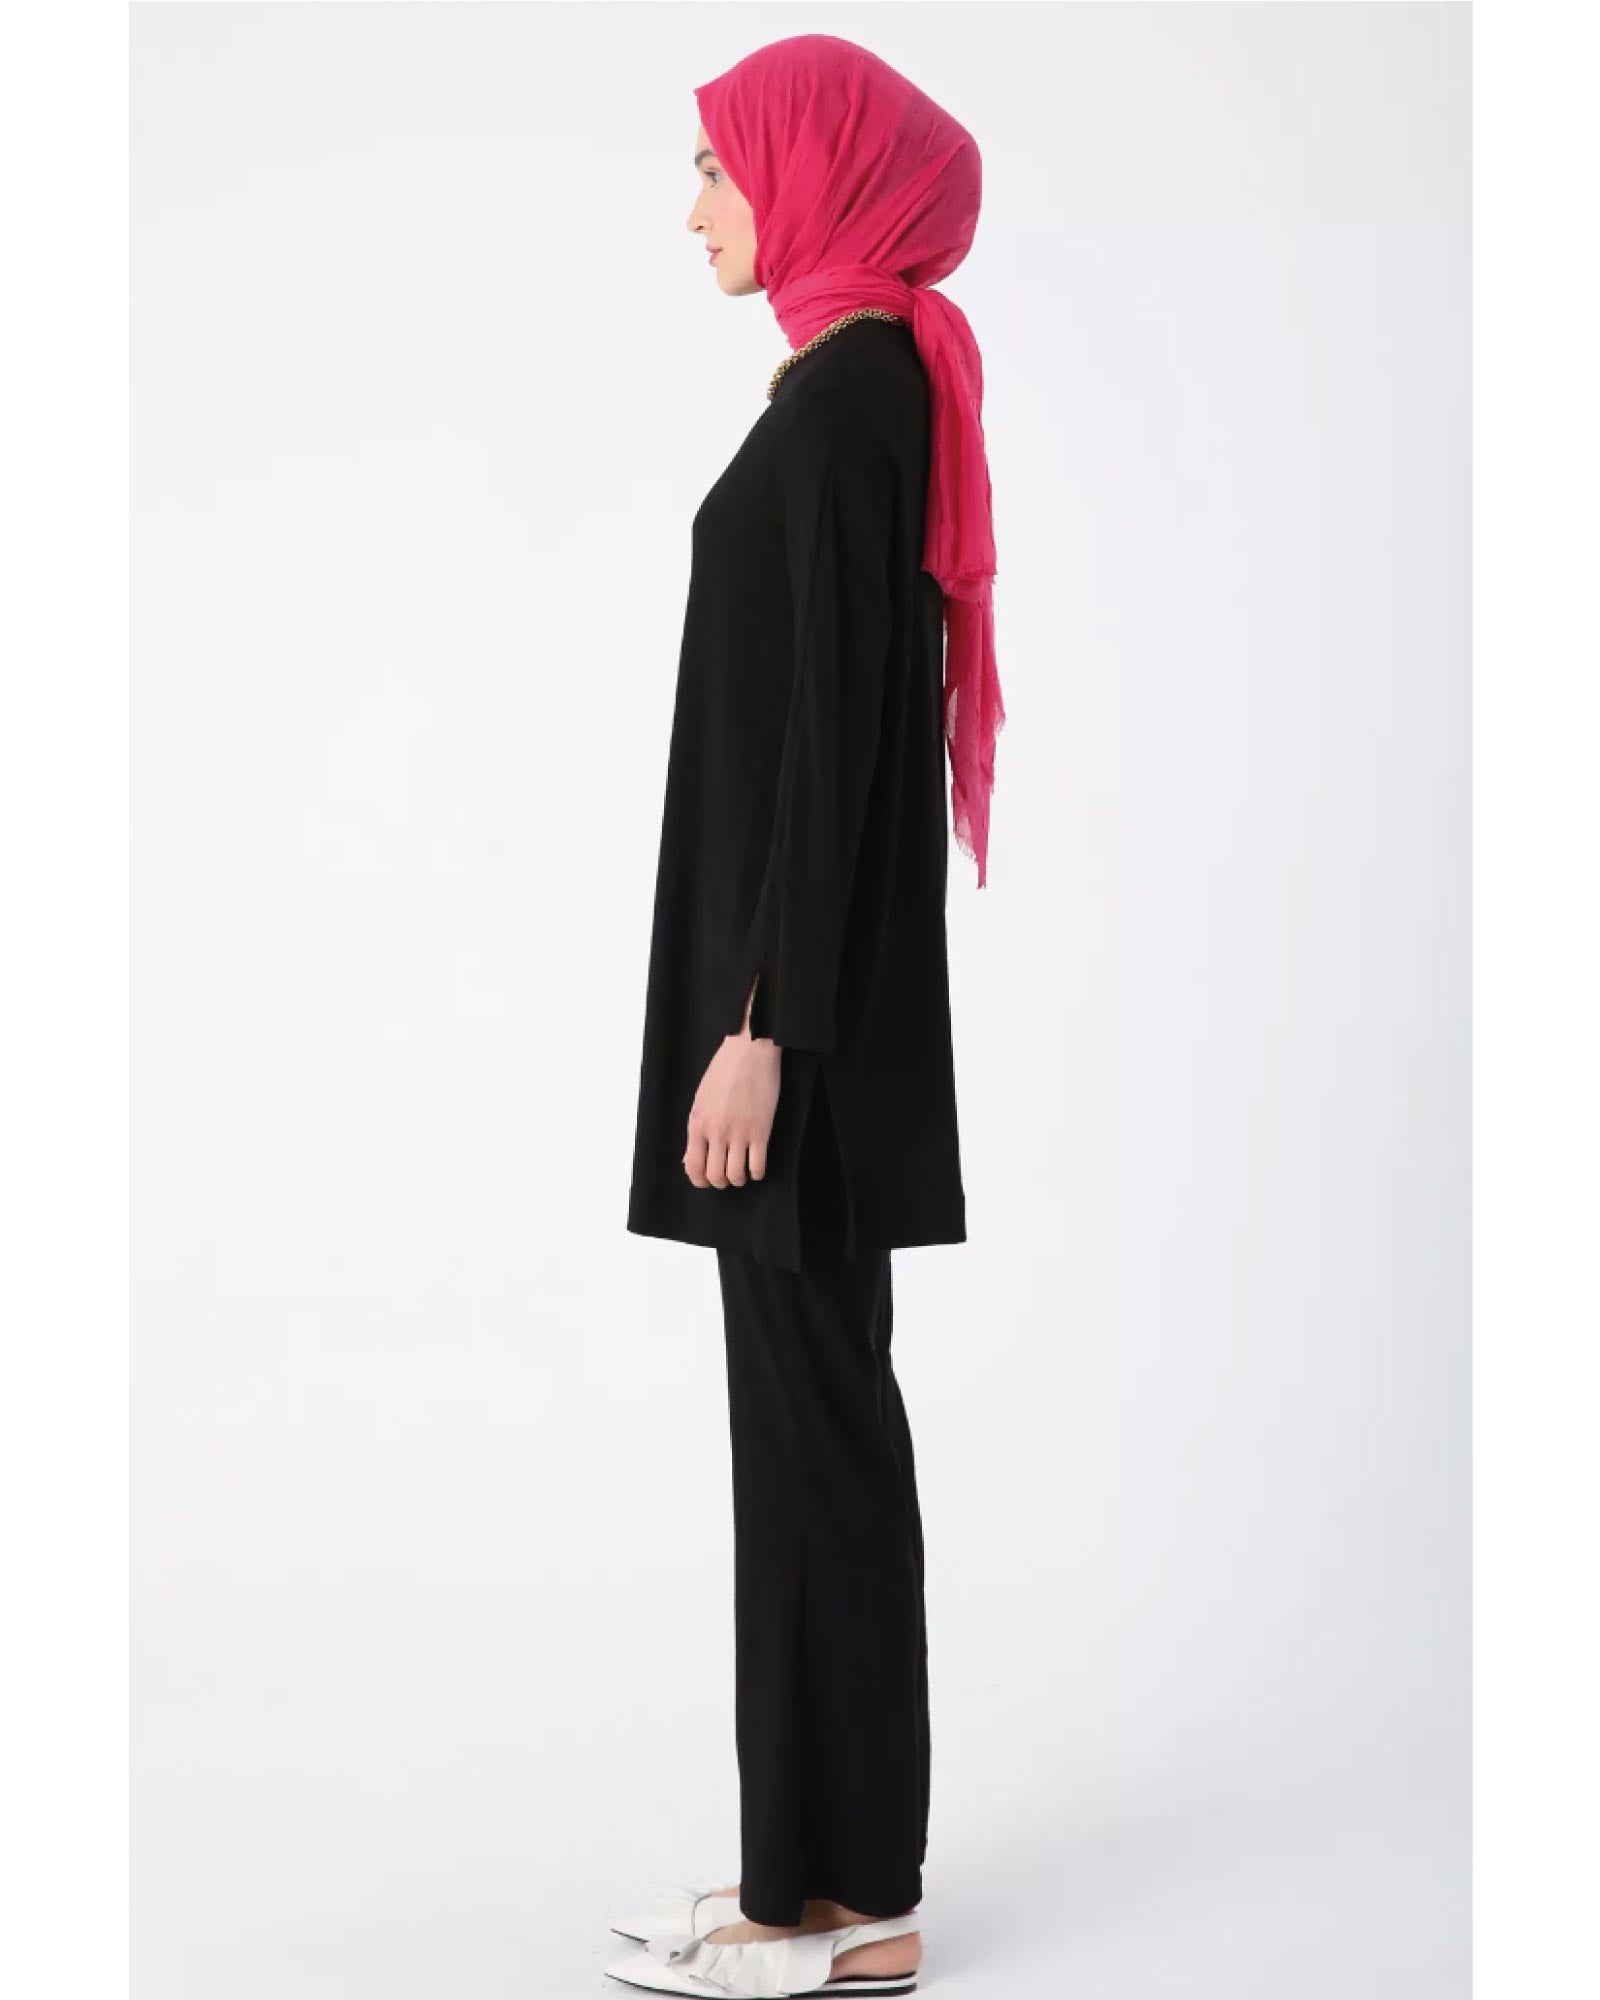 Hijab tunic pants two-piece set with sleeves and side slits and a round neckline